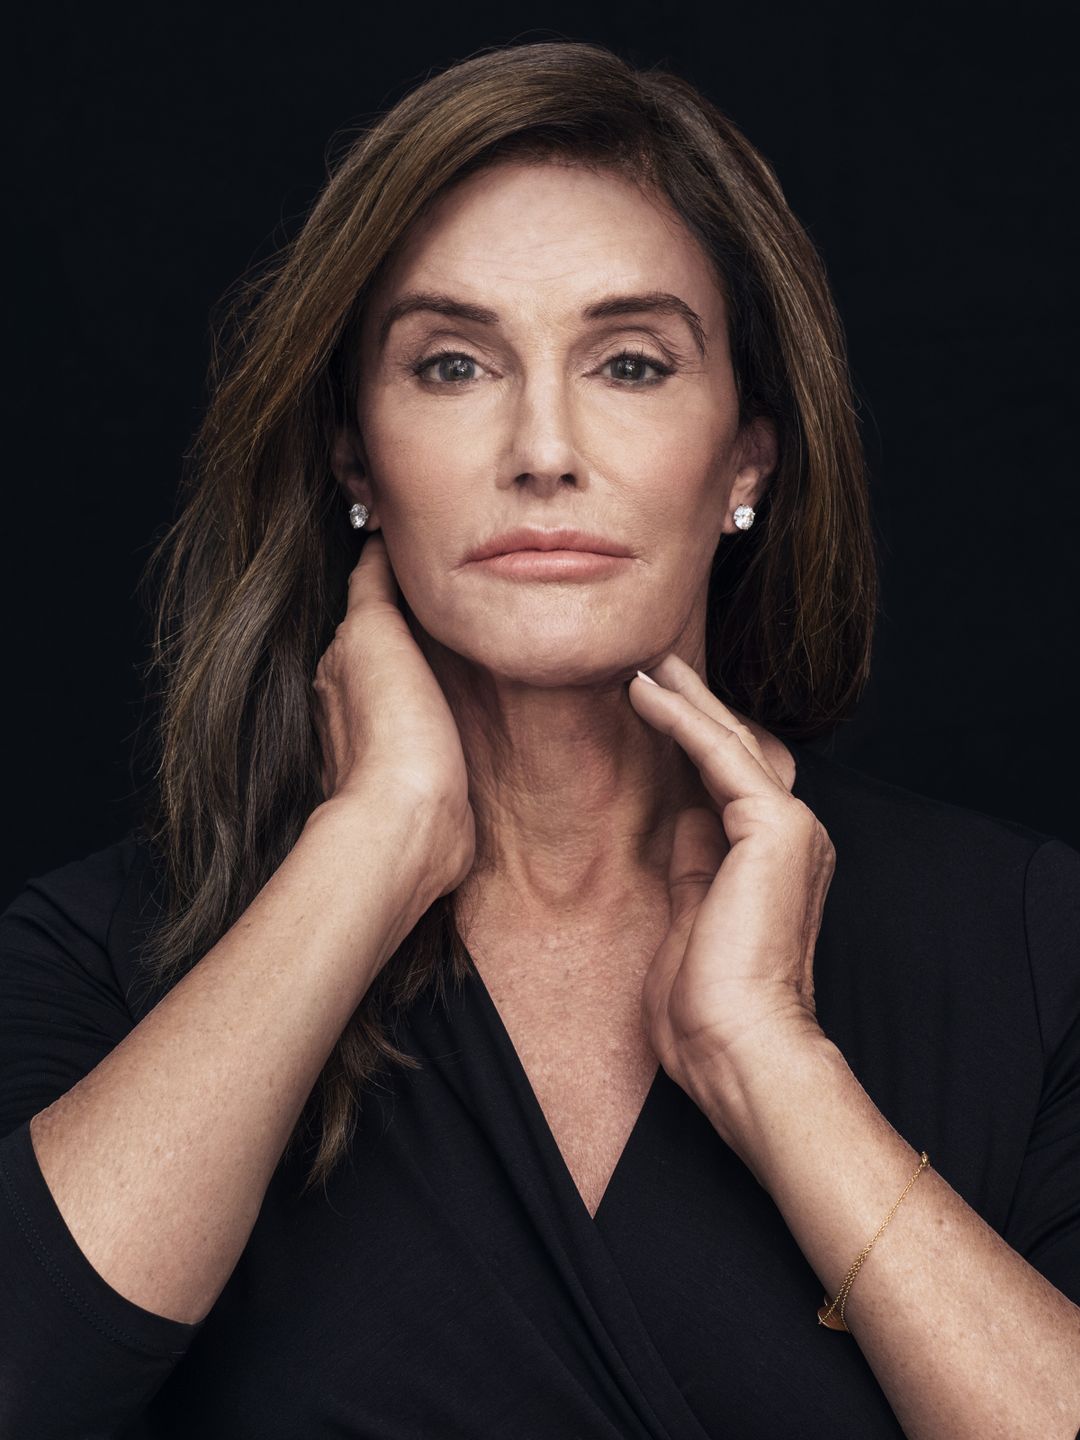 Caitlyn Jenner young photos